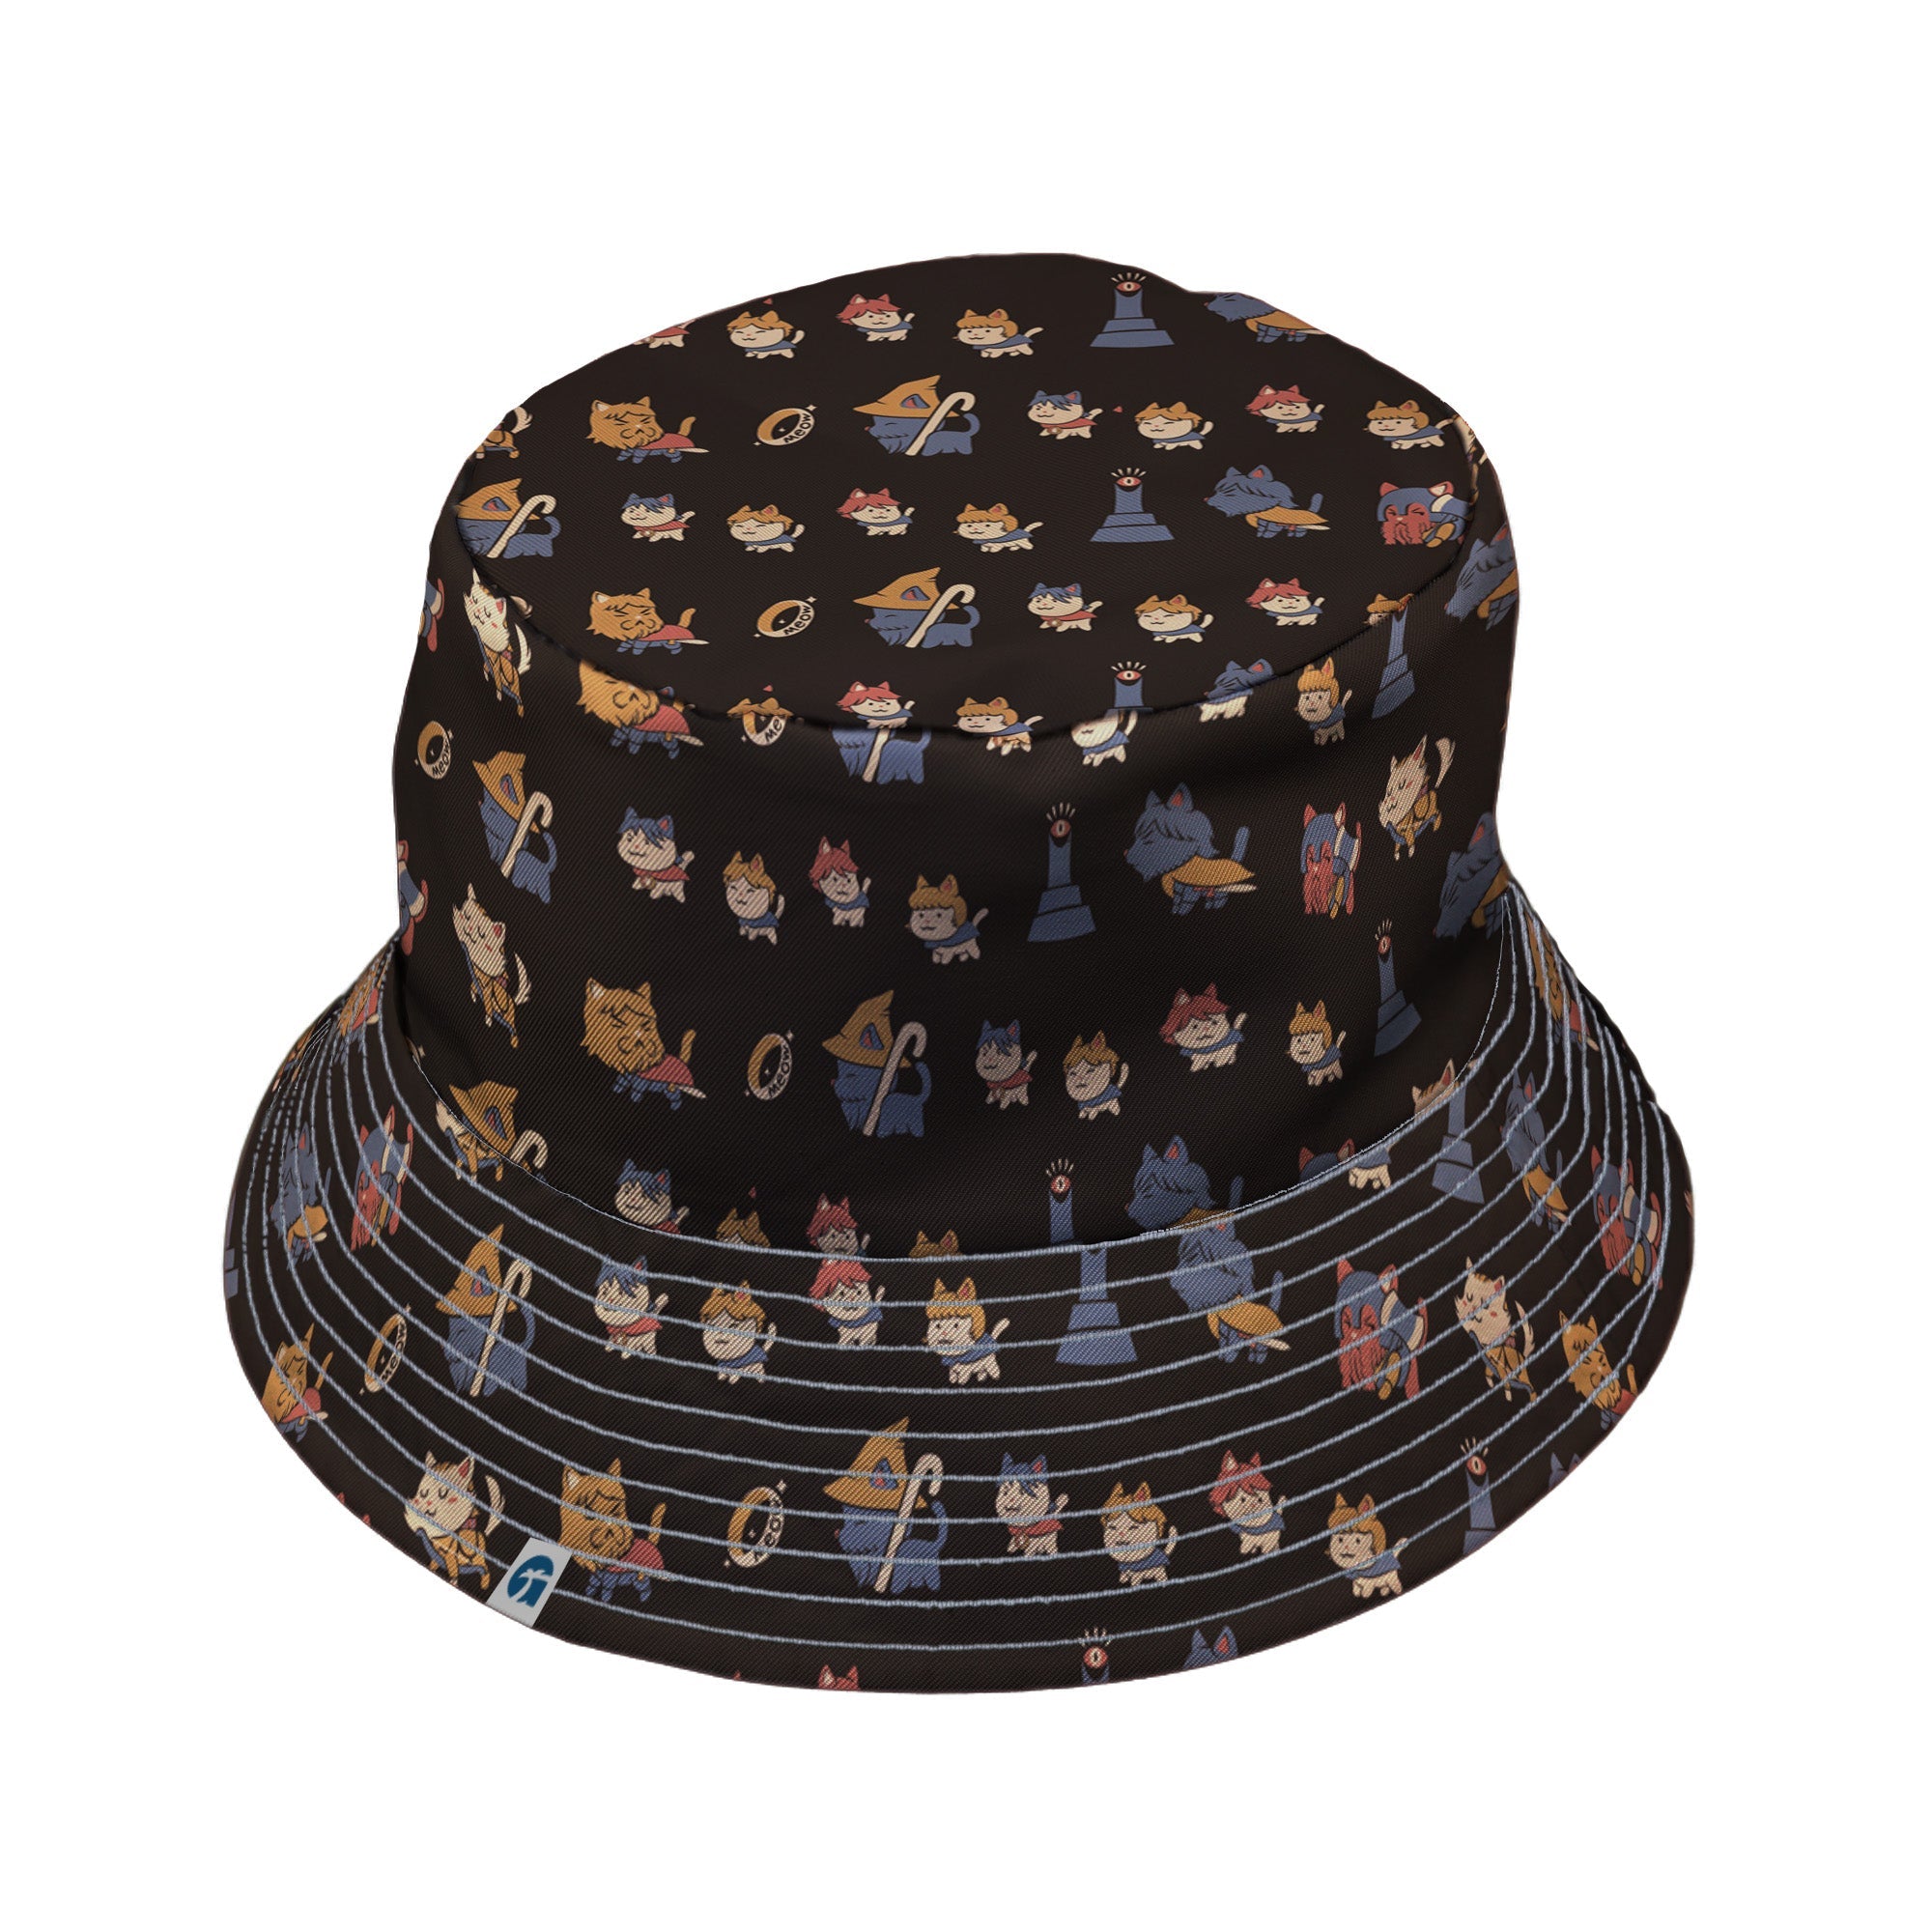 The Furrlowship of the Ring Bucket Hat